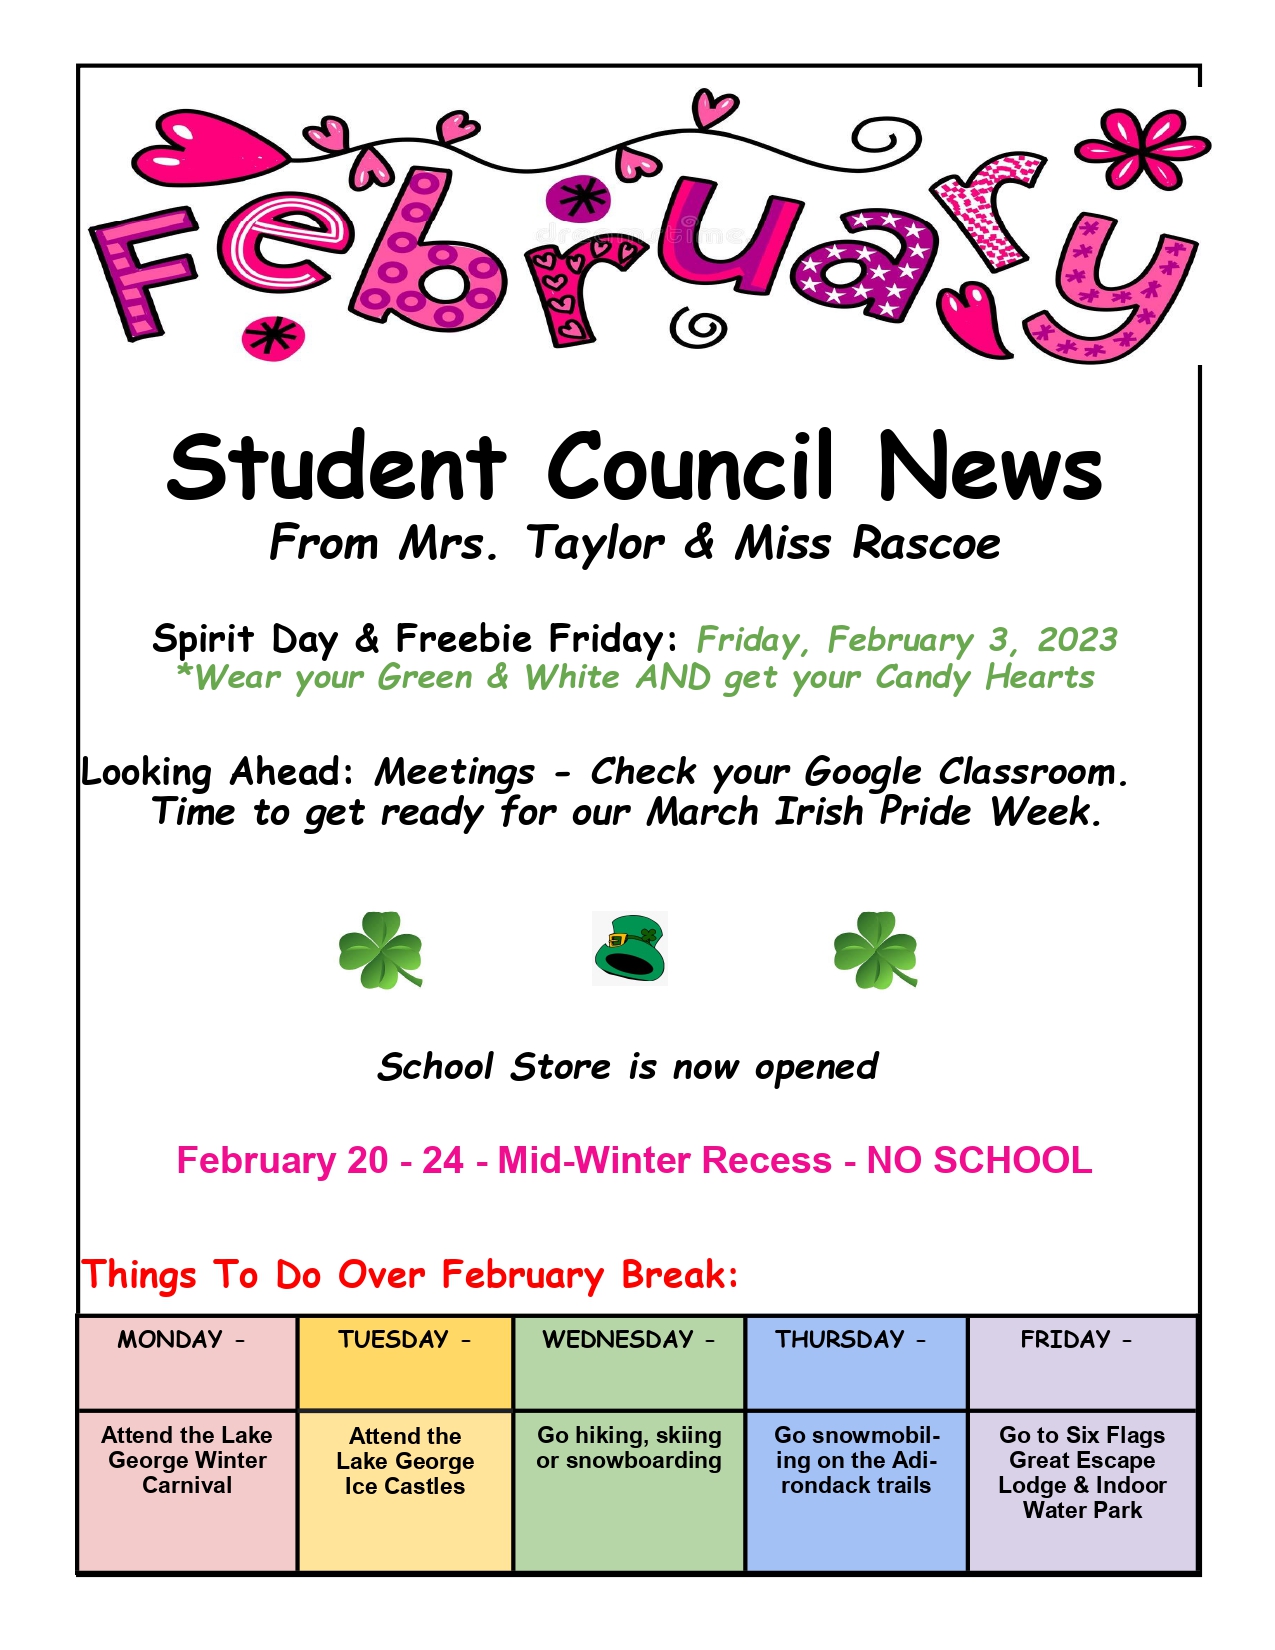 Student Council February News